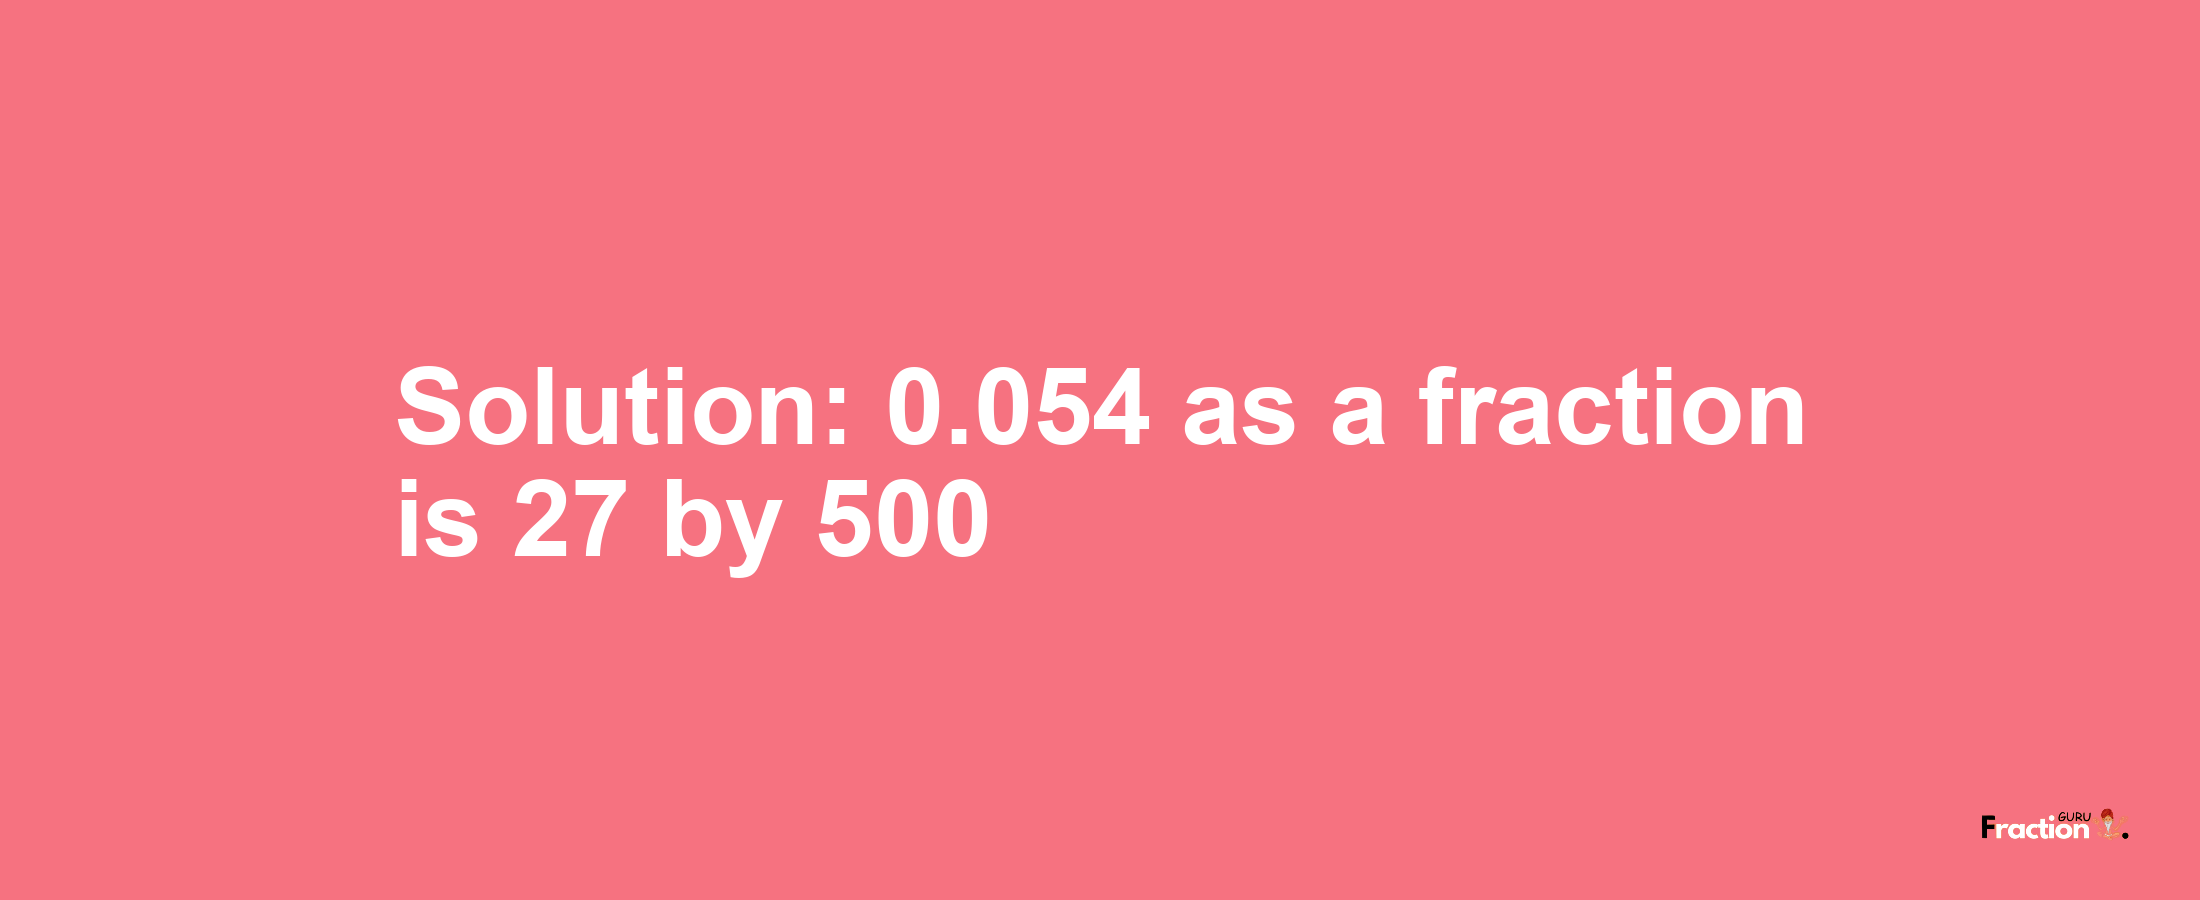 Solution:0.054 as a fraction is 27/500